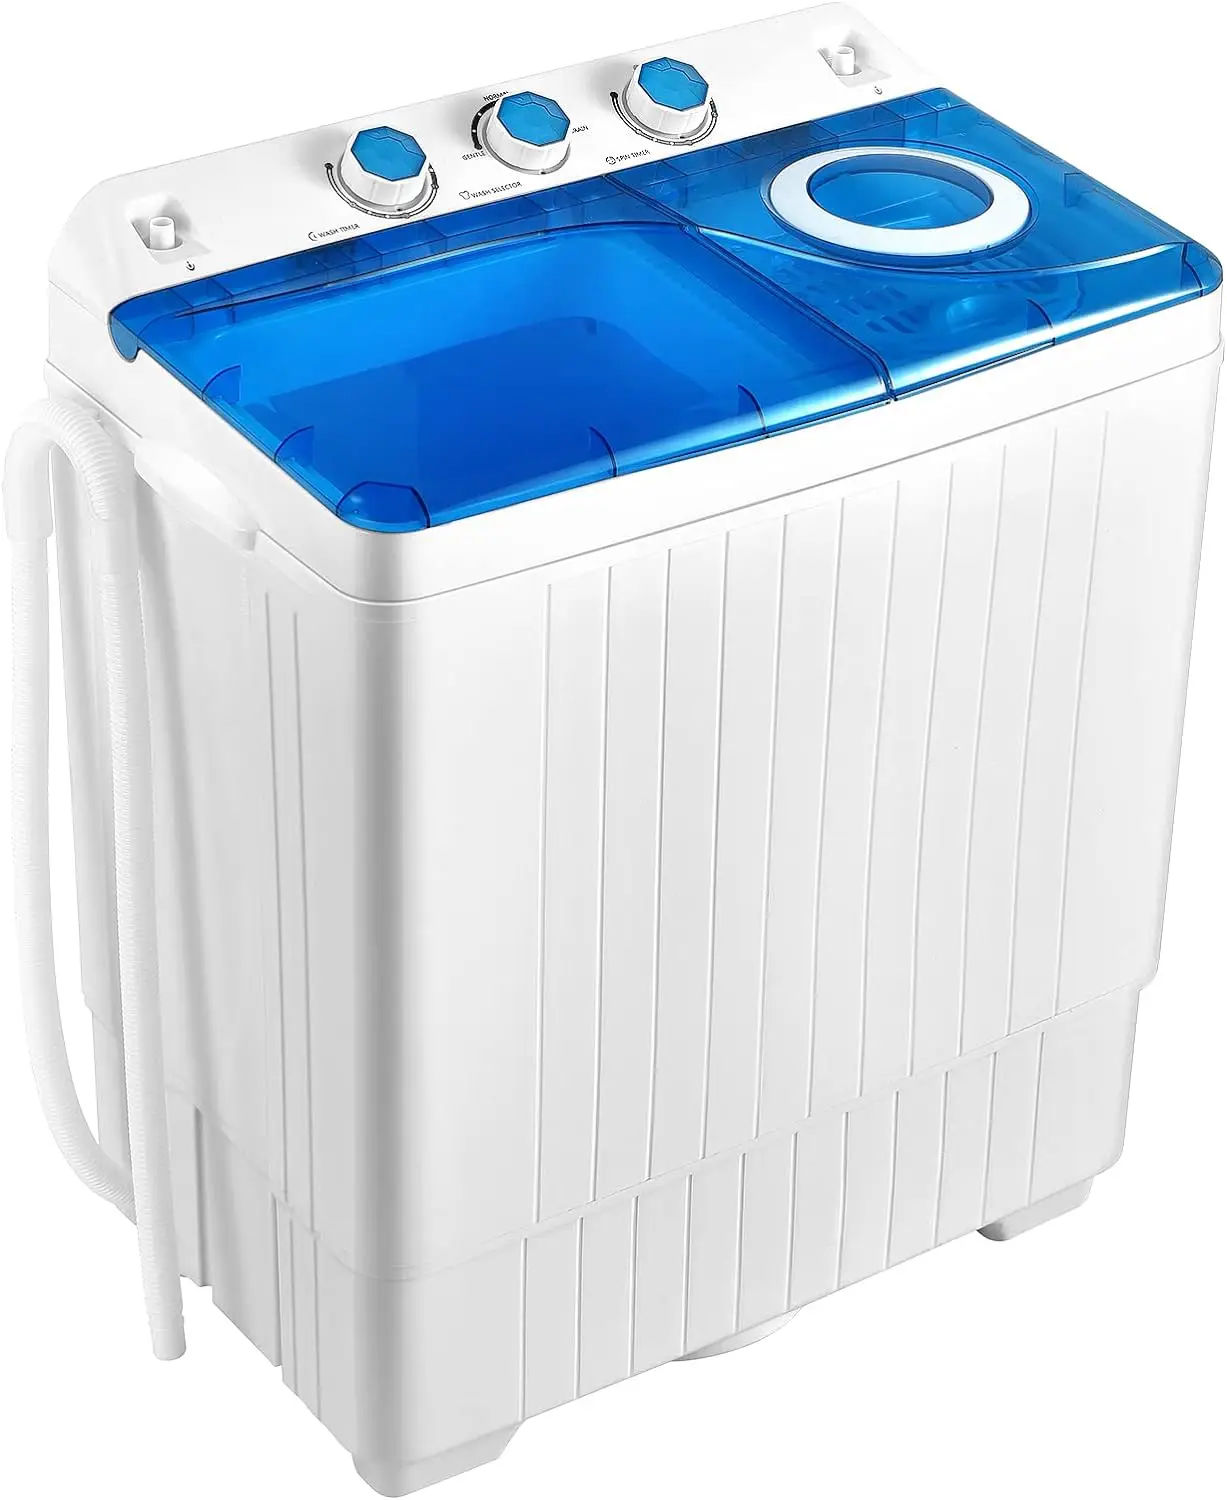 Giantex Portable Washing Machine, 2 in 1 Washer and Spinner Combo, 26lbs - $733.34